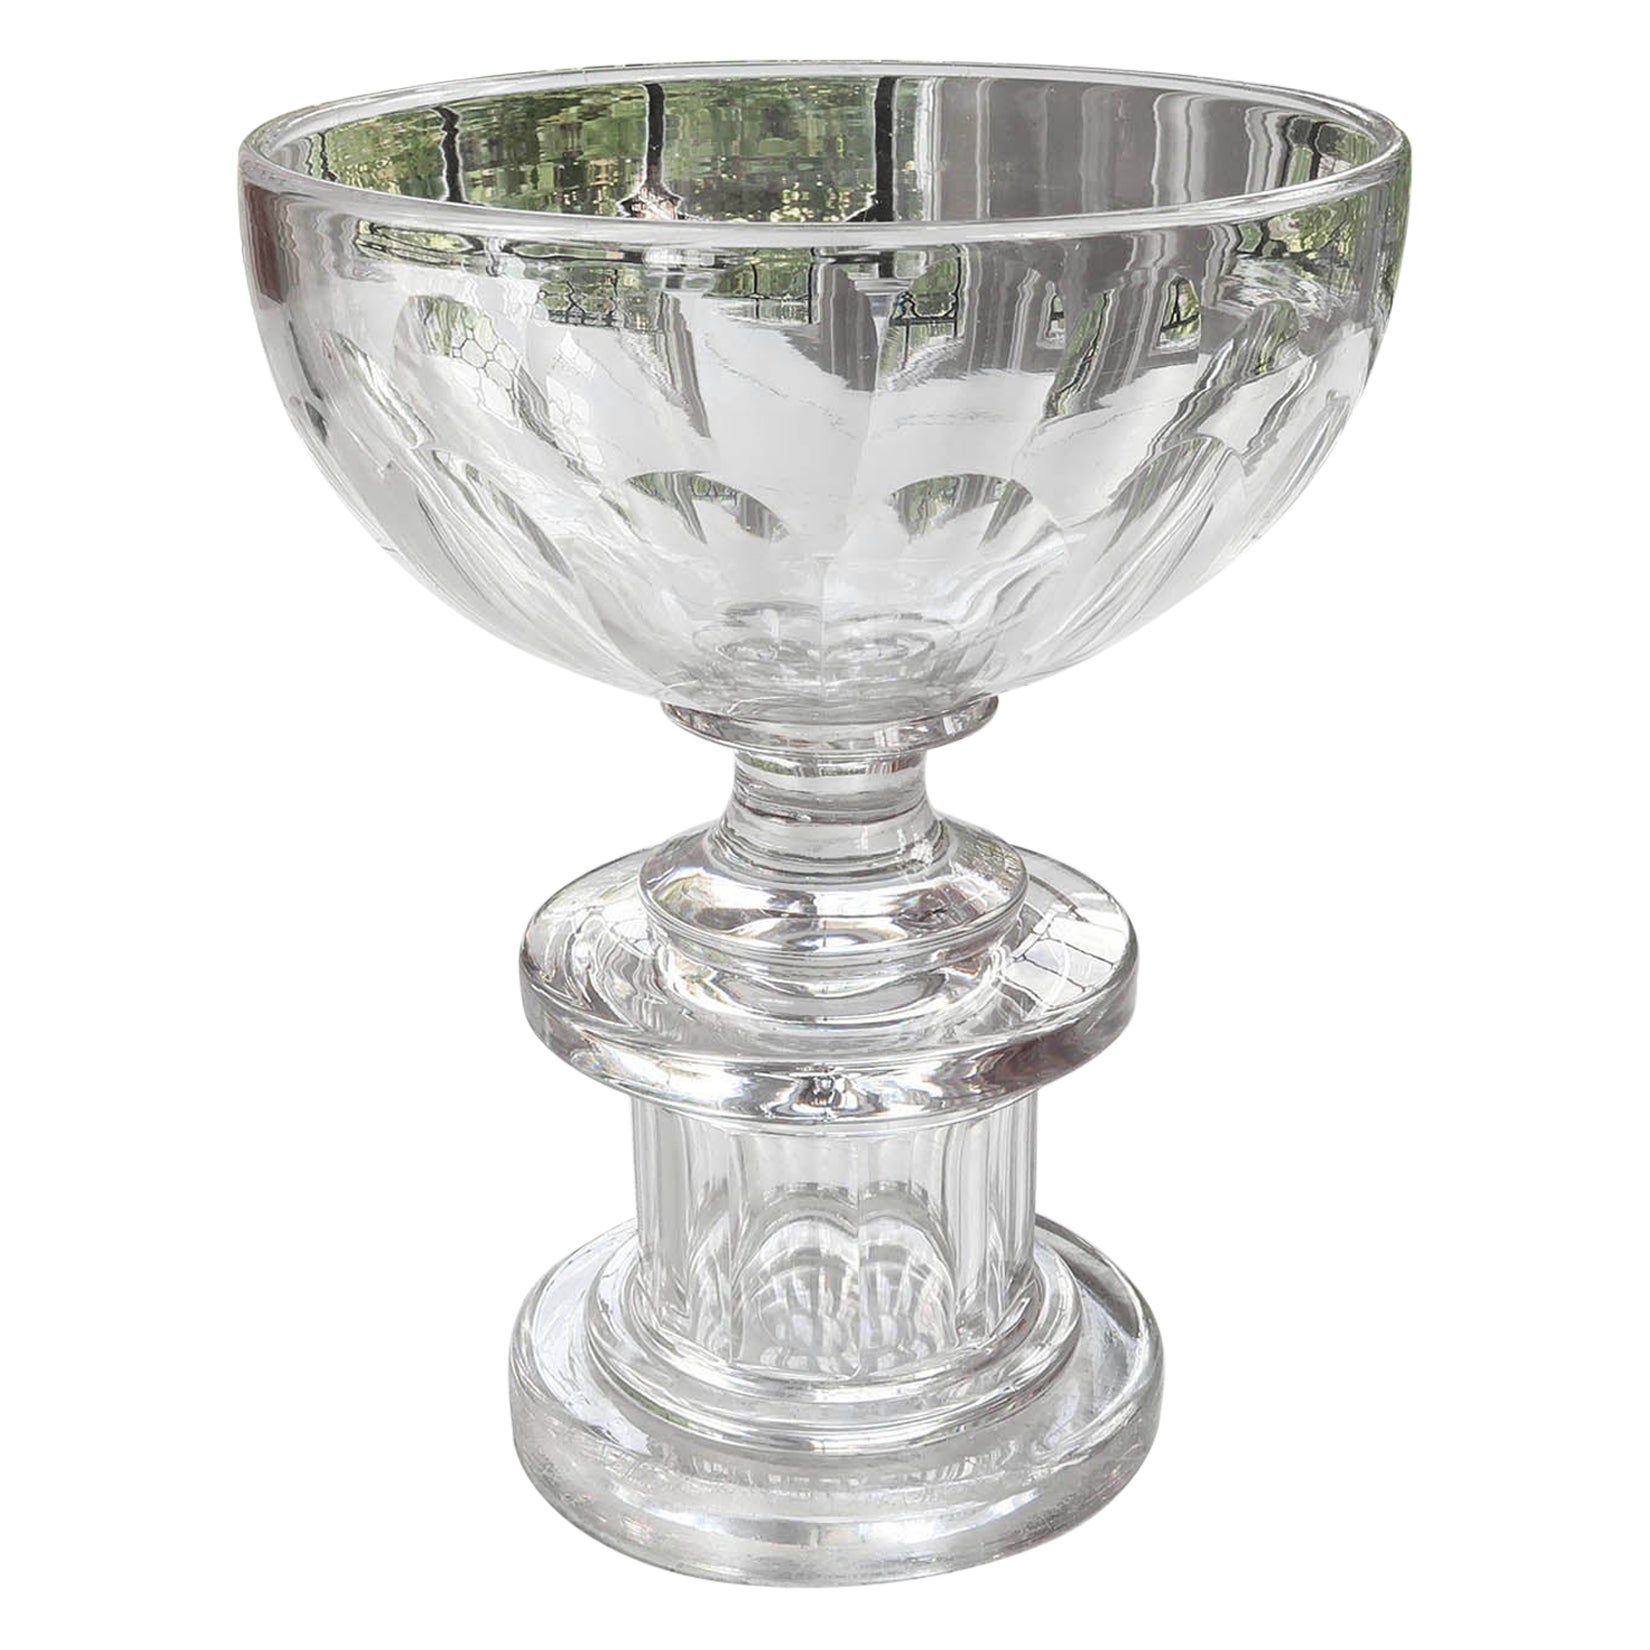  Large Antique Georgian Style Glass Pedestal Bowl, English, 19th Century For Sale